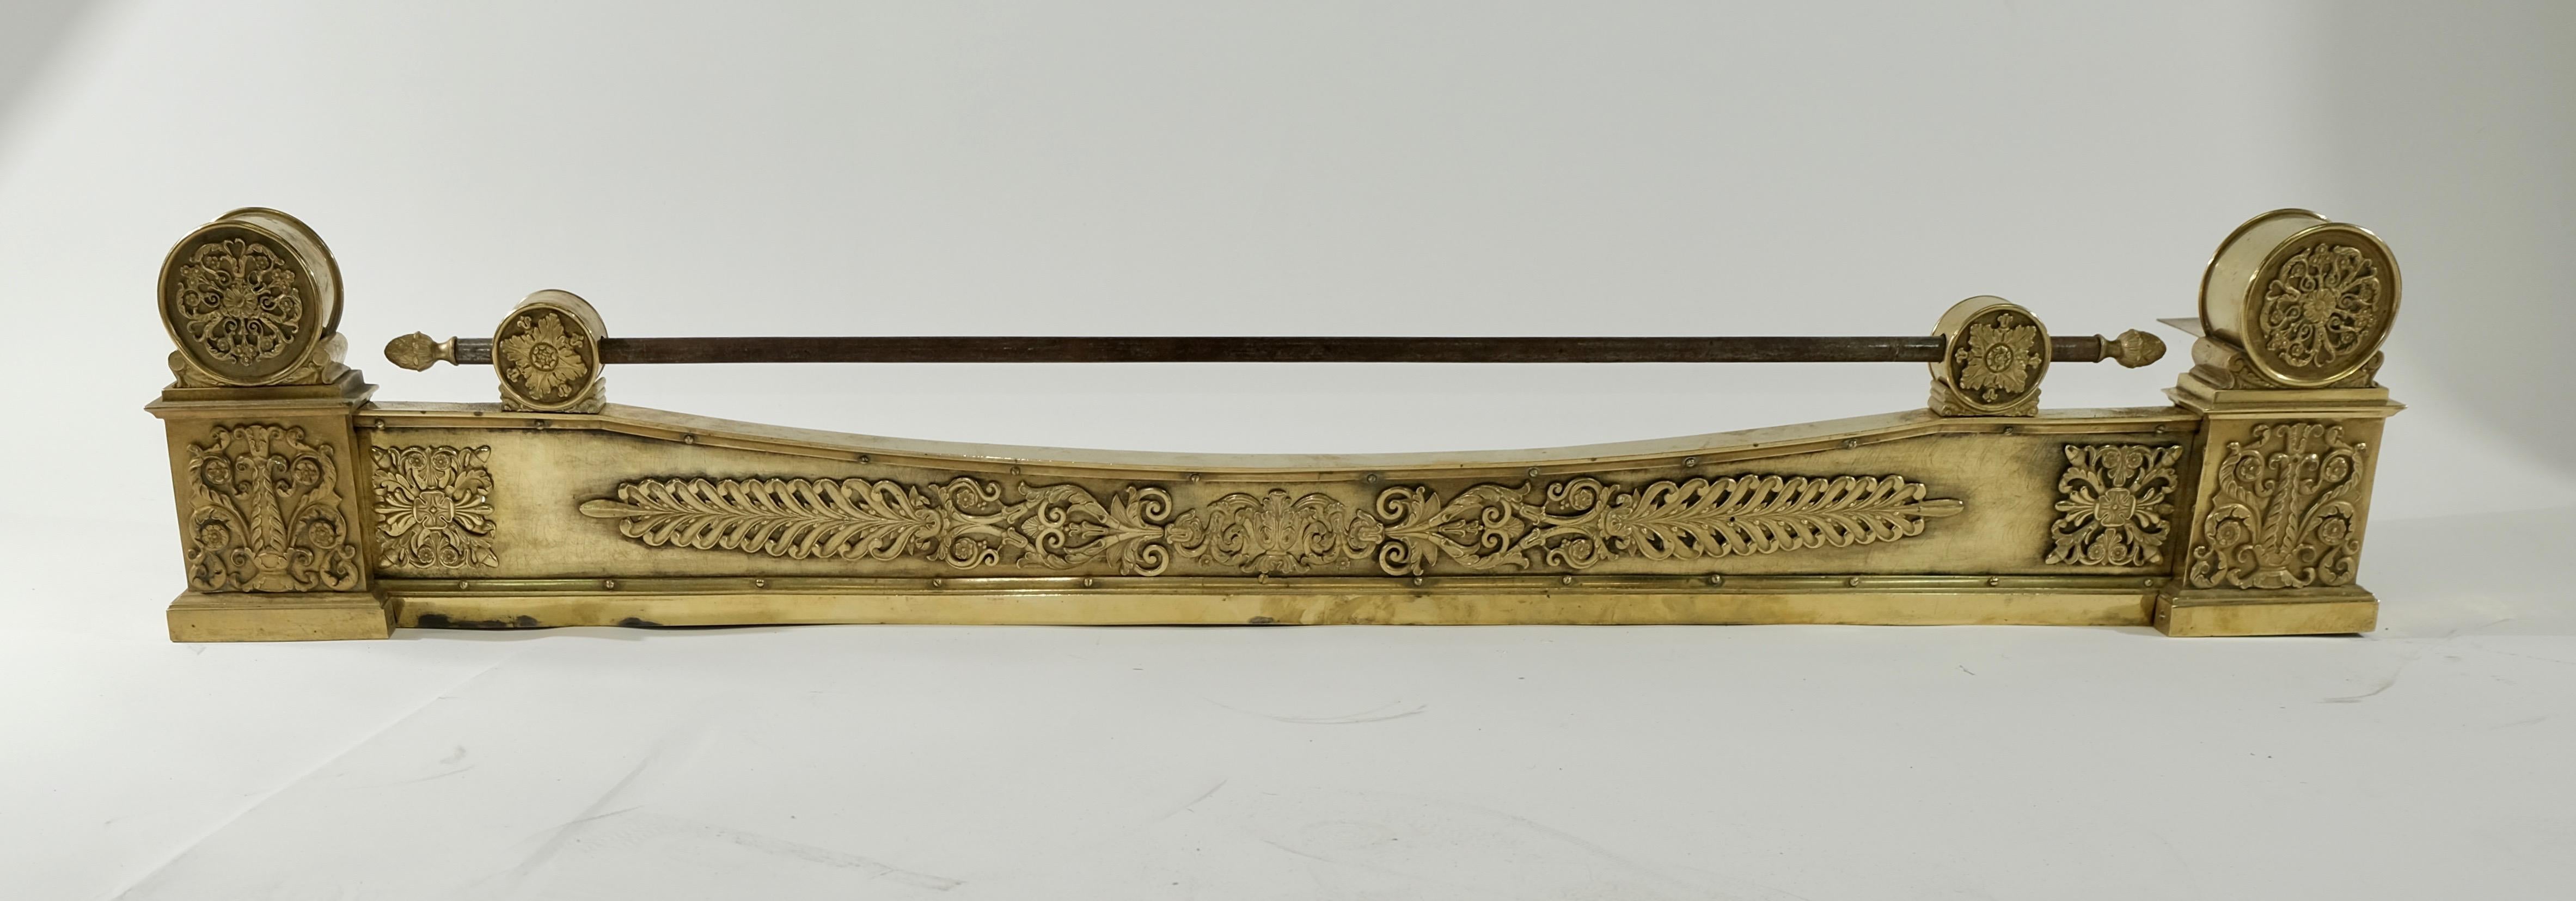 Gilt French Empire Decorative Piece for a Fire-Place For Sale